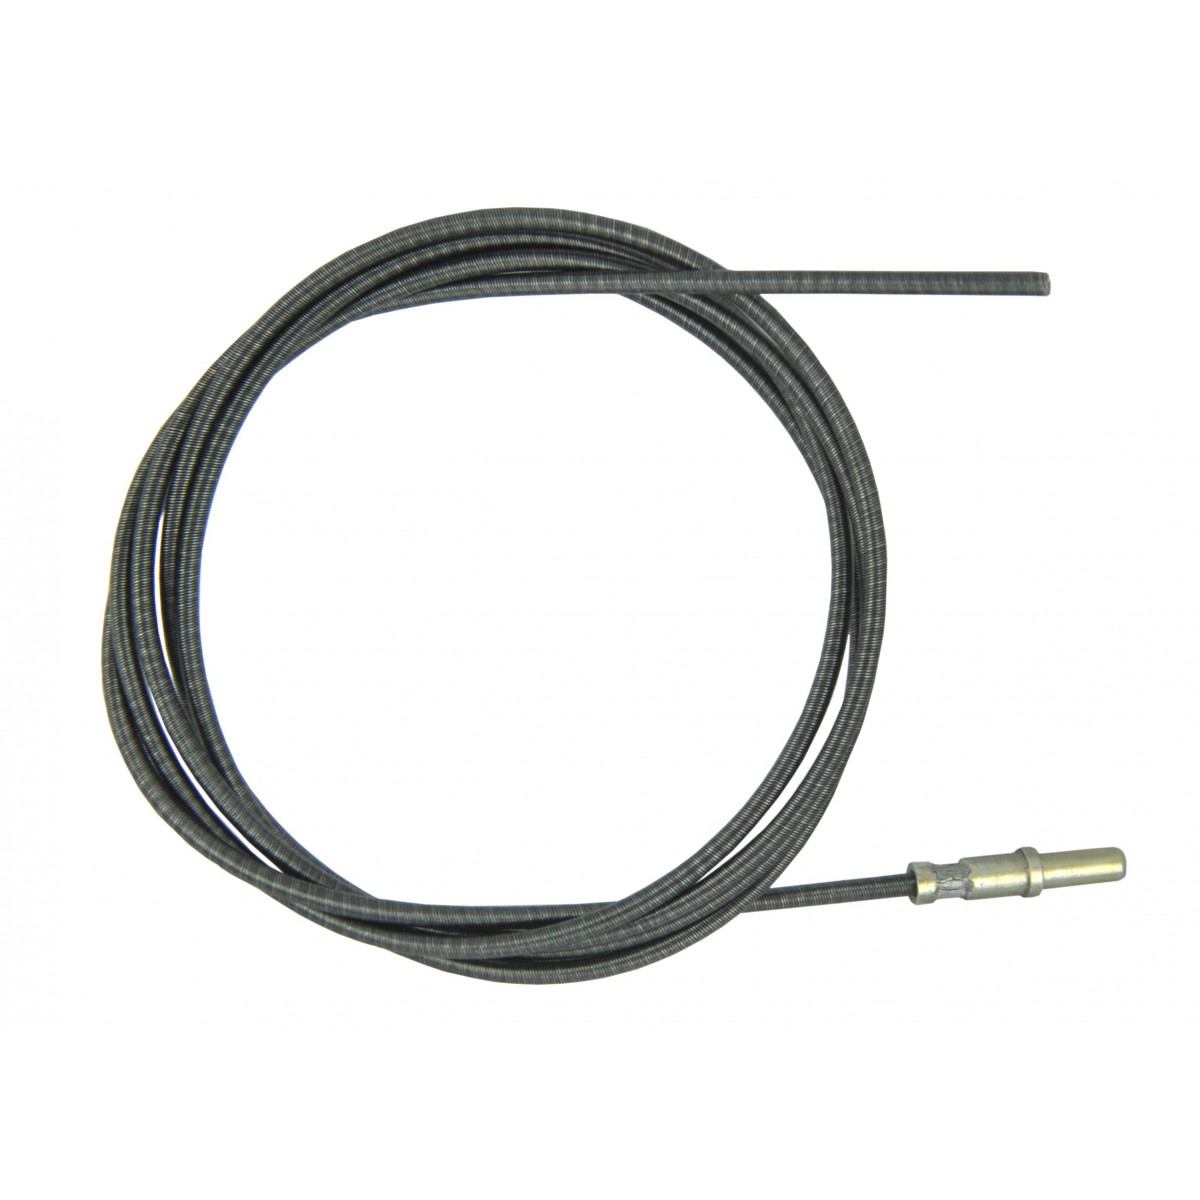 2000 mm tachometer cable Iseki tachometer without armor, cable insert